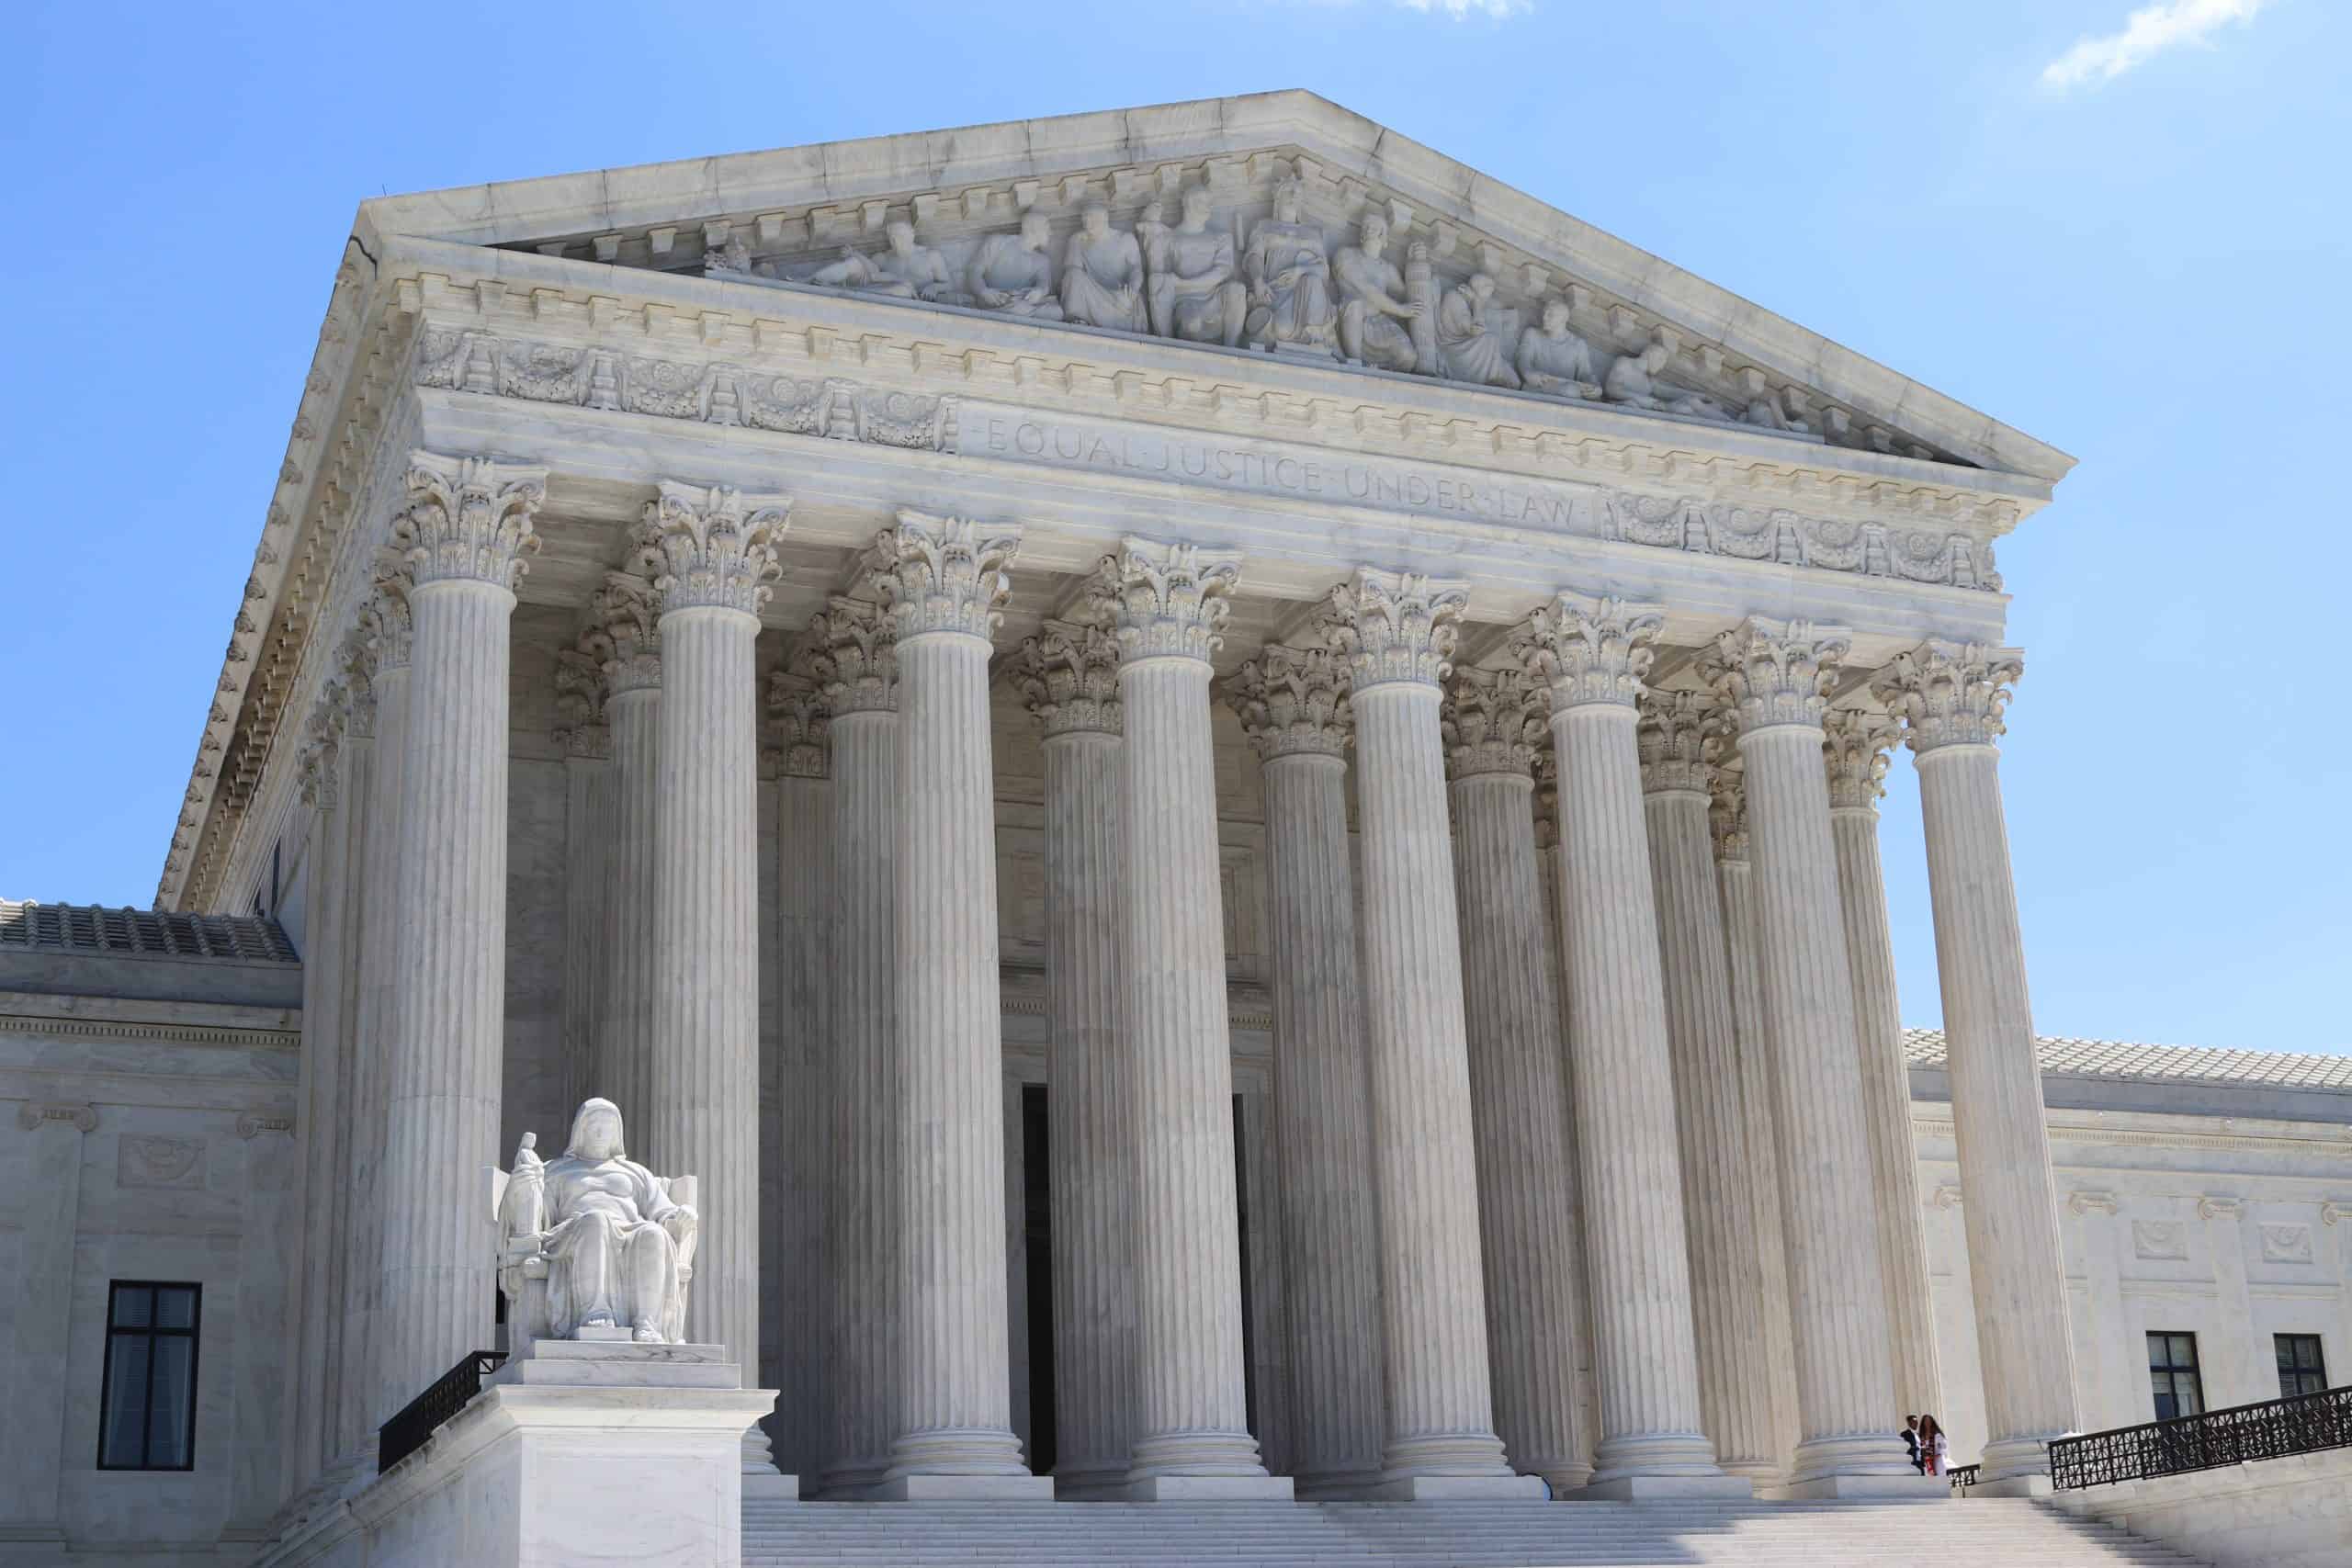 The Supreme Court of the United States of America has quashed the challenge that was put on the national medical insurance under the federal scheme of ‘Obamacare’ which is the official Affordable Care Act